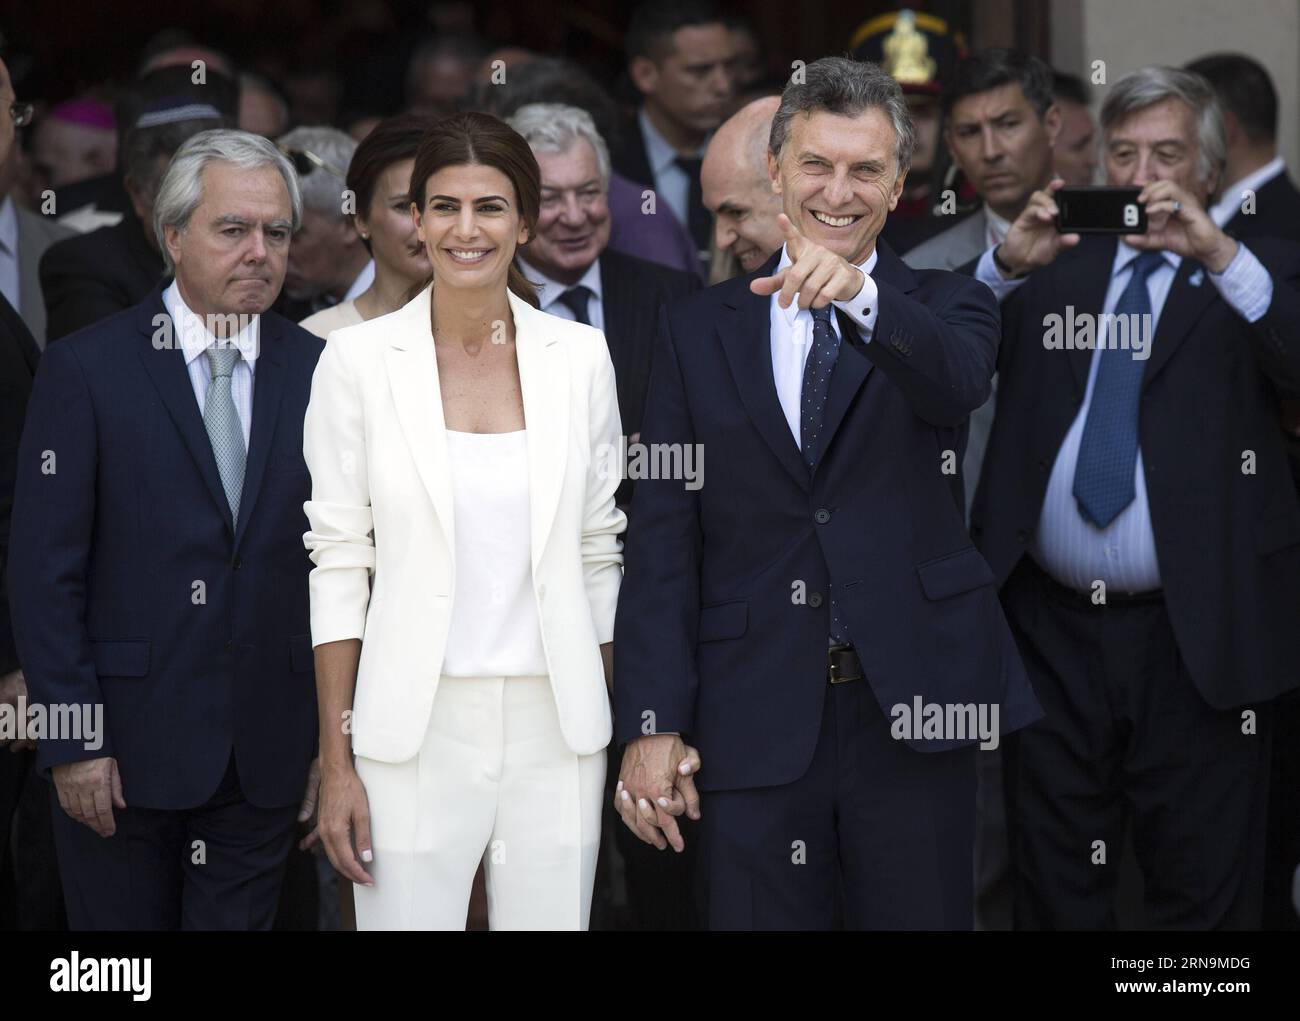 (151211) -- BUENOS AIRES, Dec. 11, 2015 -- Argentina s President Mauricio Macri (2nd R) leaves with First Lady Juliana Awada (2nd L) after taking part in the Tedeum at the Metropolitan Cathedral in Buenos Aires, capital of Argentina, Dec. 11, 2015. According to local press, Mauricio Macri attended Friday with Argentina s Vice President Gabriela Michetti and his Cabinet the traditional religious service at the Metropolital Cathedral, one day after his pesidential inauguration. Martin Zabala) (jg) (fnc) ARGENTINA-BUENOS AIRES-POLITICS-PRESIDENT e MARTINxZABALA PUBLICATIONxNOTxINxCHN   151211 Bue Stock Photo